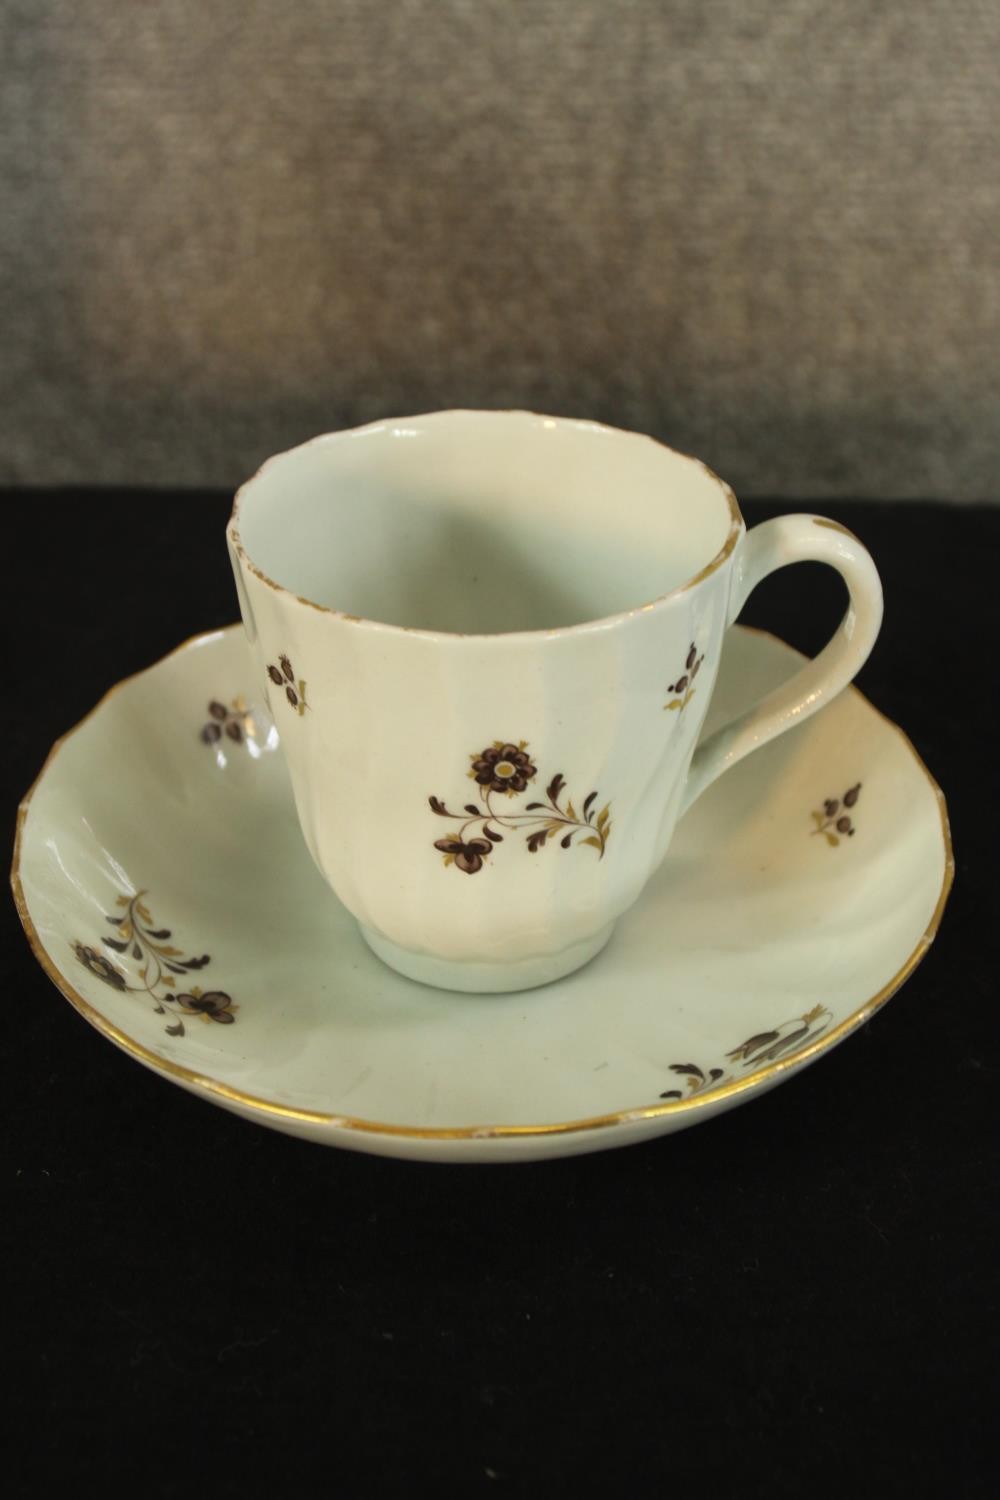 A 19th century hand painted tea set made up of three cups and saucers, a sugar bowl and two - Image 2 of 4